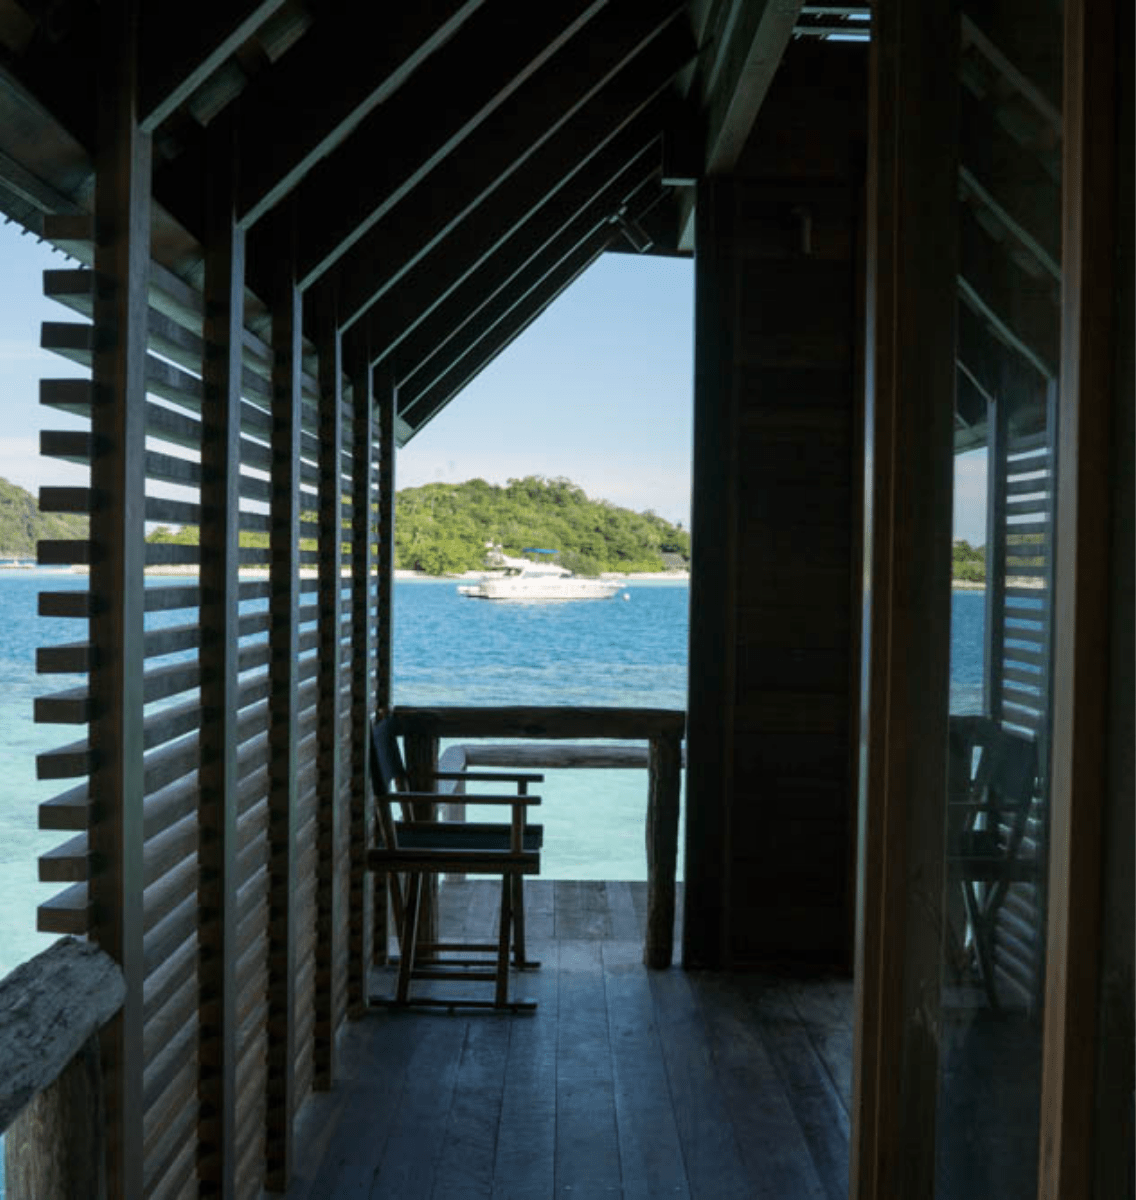 Overwater bungalow side entrance at Bawah Reserve, Indonesia.